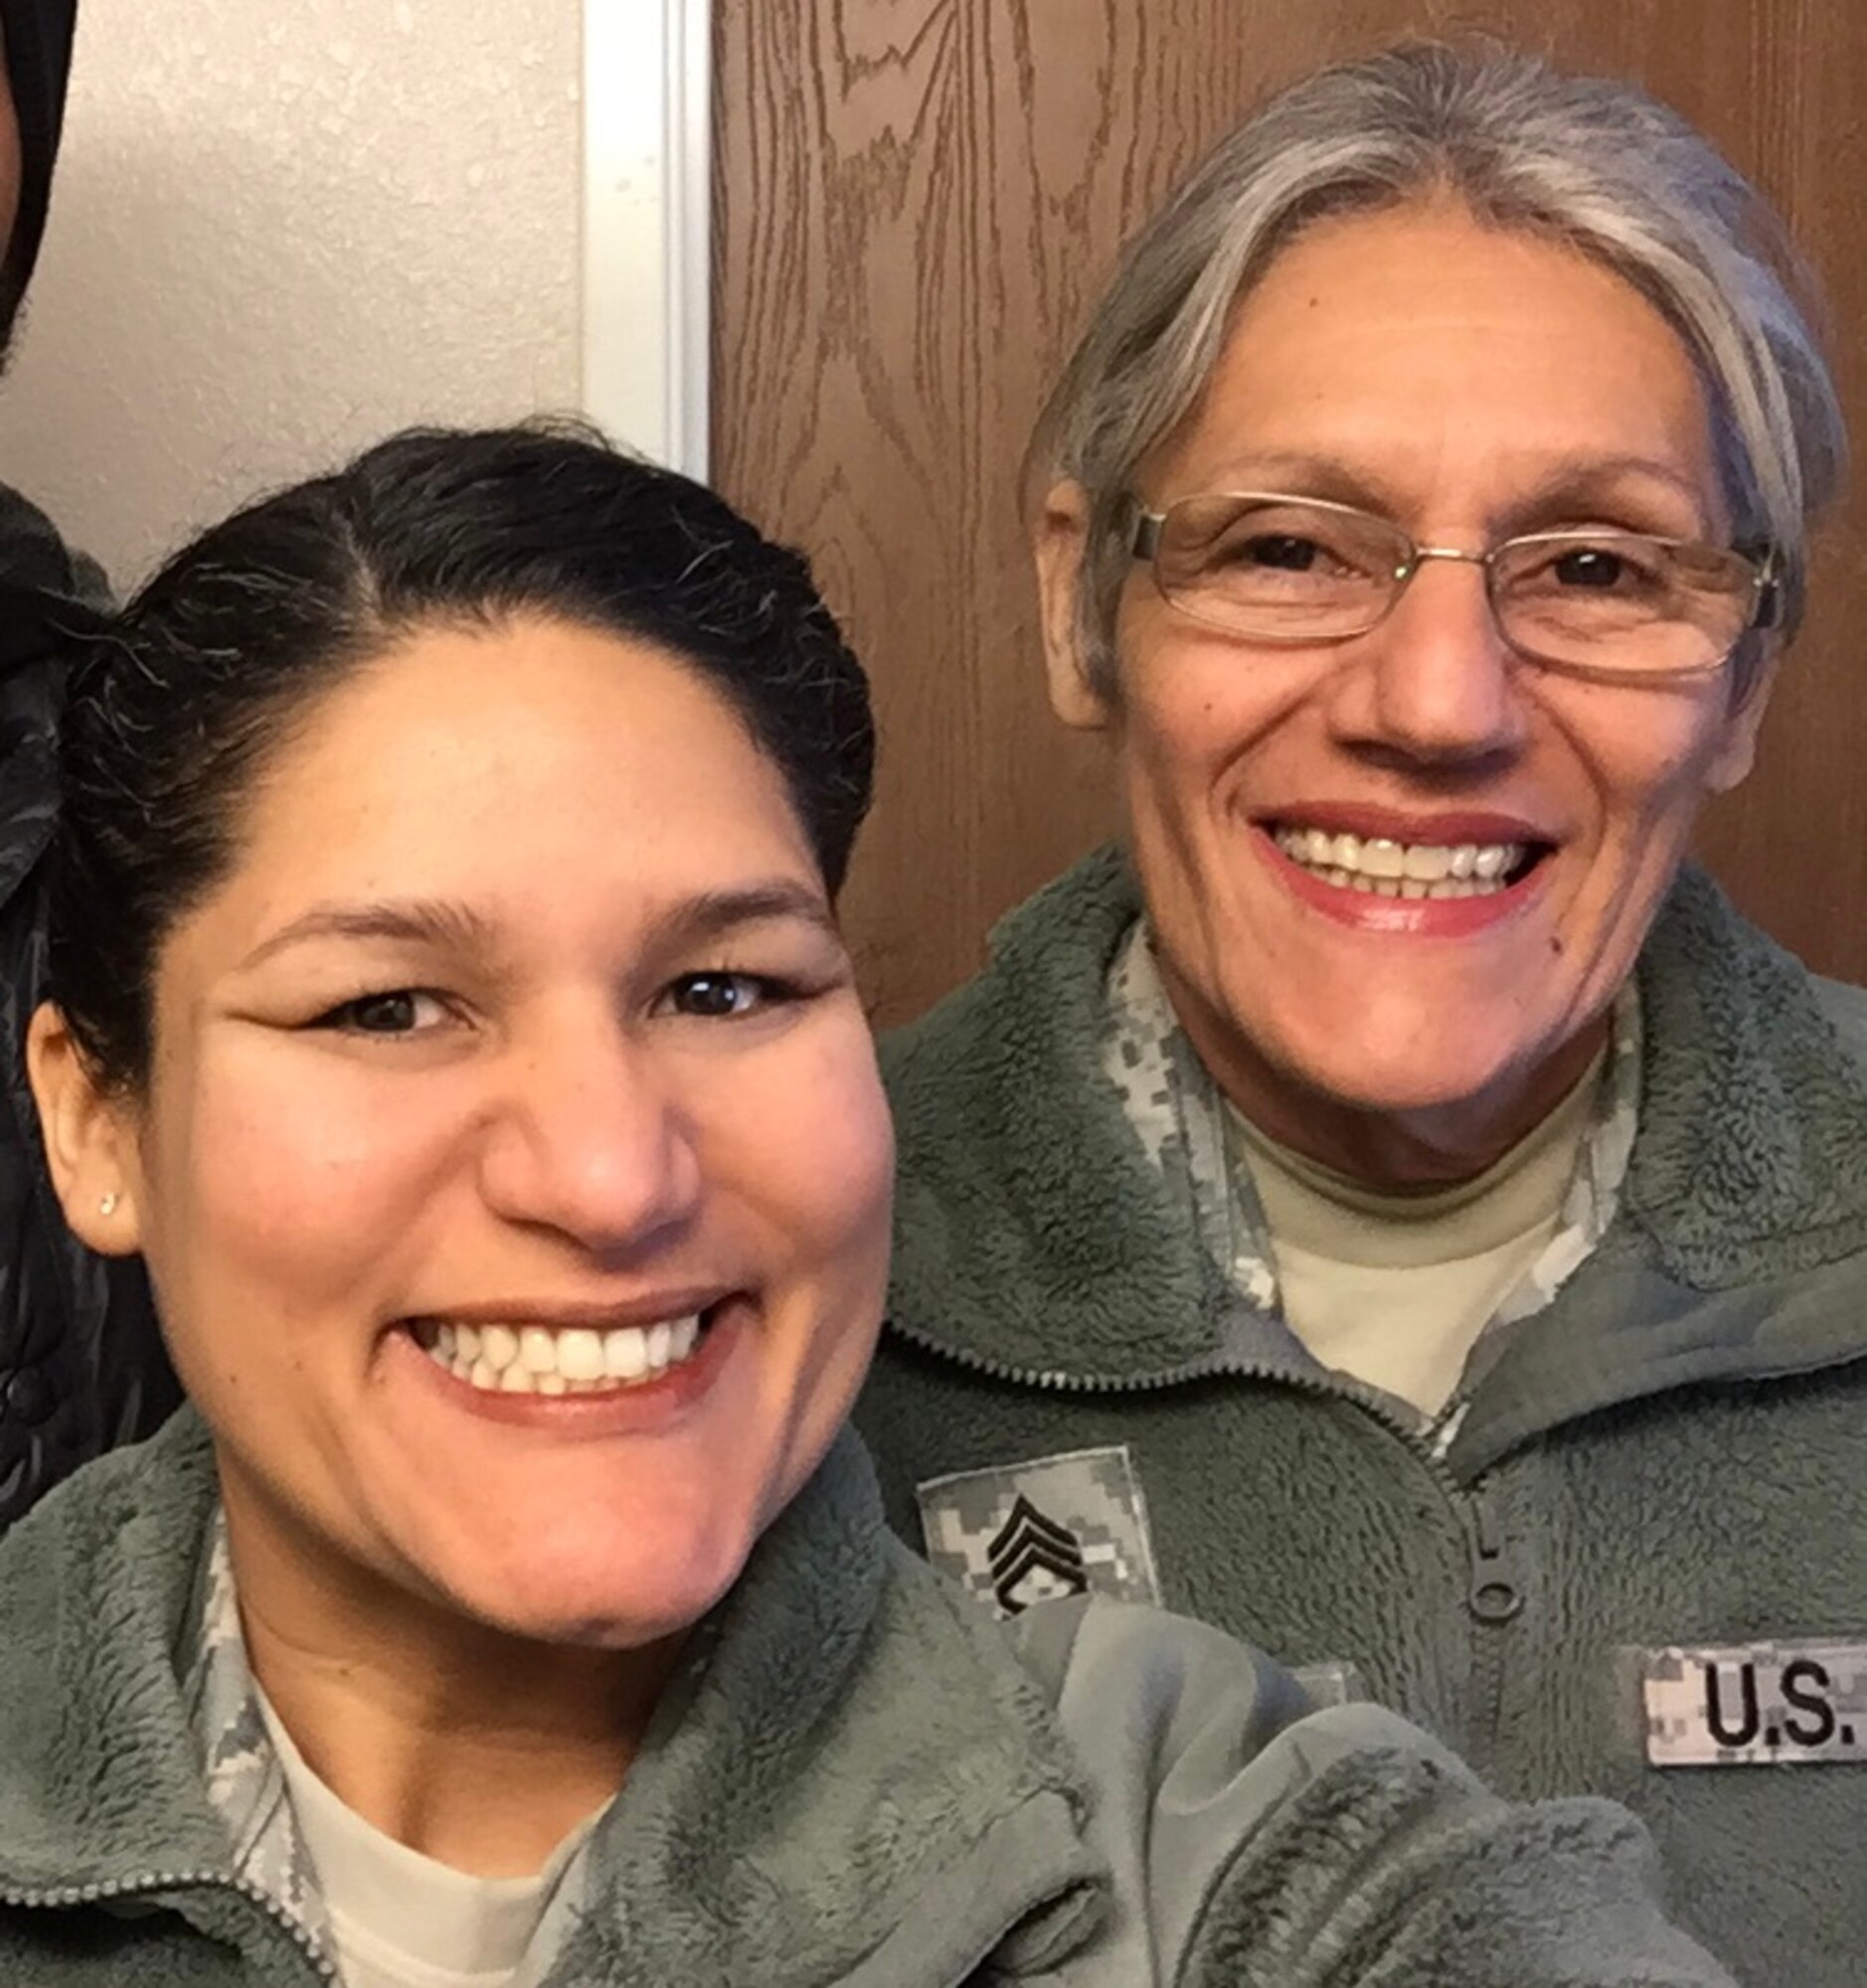 Master Sgt. Namir Laureano, left, smiles for a photo with her mom, Norma Miranda, while attending her brother's graduation from the U.S. Navy's basic training in Chicago, Illinois, March 4, 2016. Miranda retired in 2014 after serving 35 years in the Army National Guard and Army Reserve, and Laureano continues to serve after 16 years in the U.S. Air Force and Air National Guard. (Courtesy photo provided by Master Sgt. Namir Laureano)